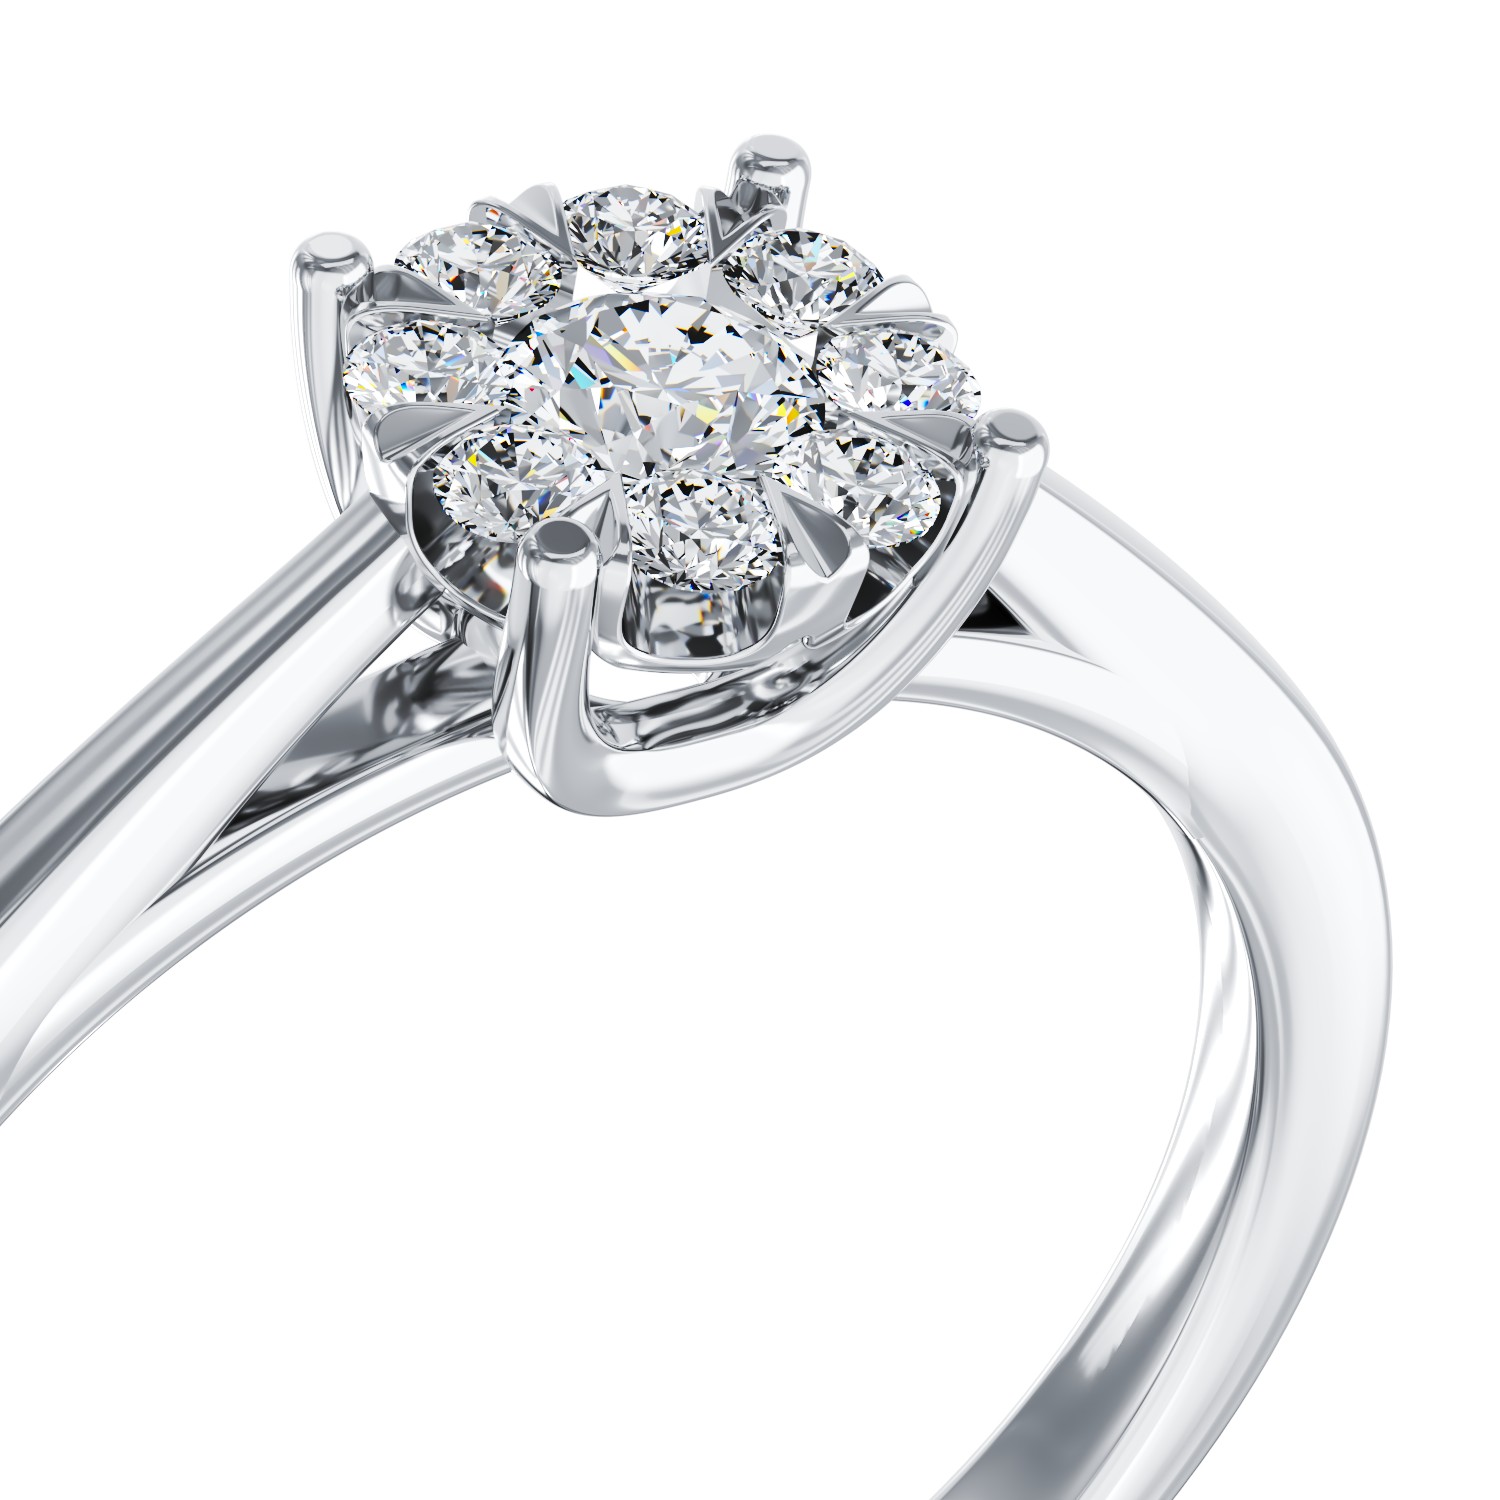 18K white gold engagement ring with diamonds of 0.15ct